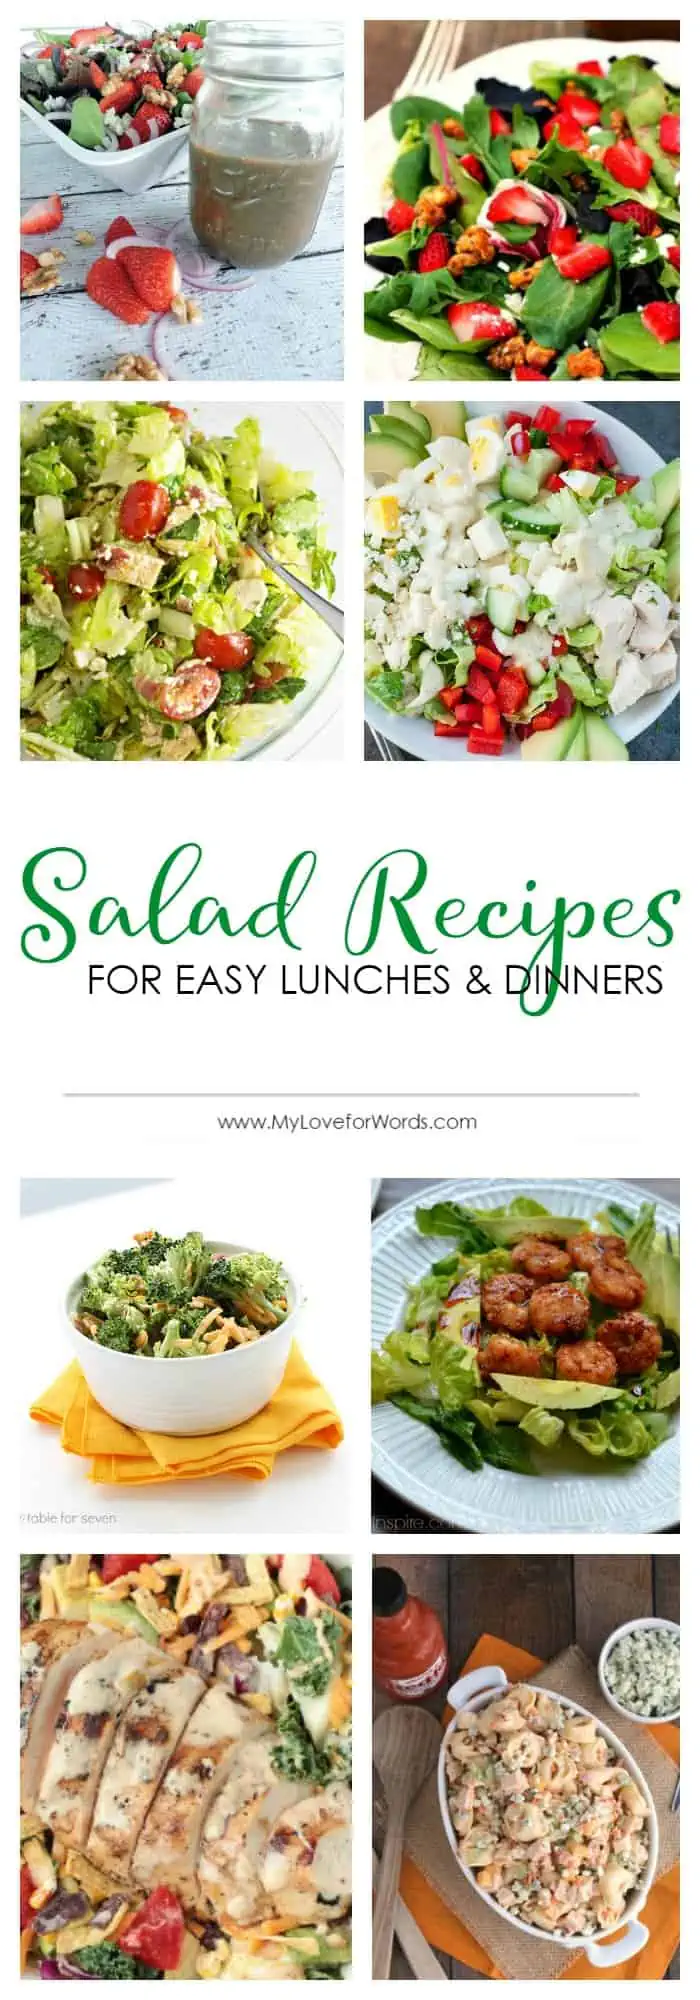 Salad recipes for easy lunches and dinners! The perfect solution for hot summer nights or when you're just too tired to cook. Also great for parties and bbq nights. Customize with your own ingredients like chicken, egg, pasta, fruit, or your favorite salad dressing. Healthy and delicious... it doesn't get better than that!